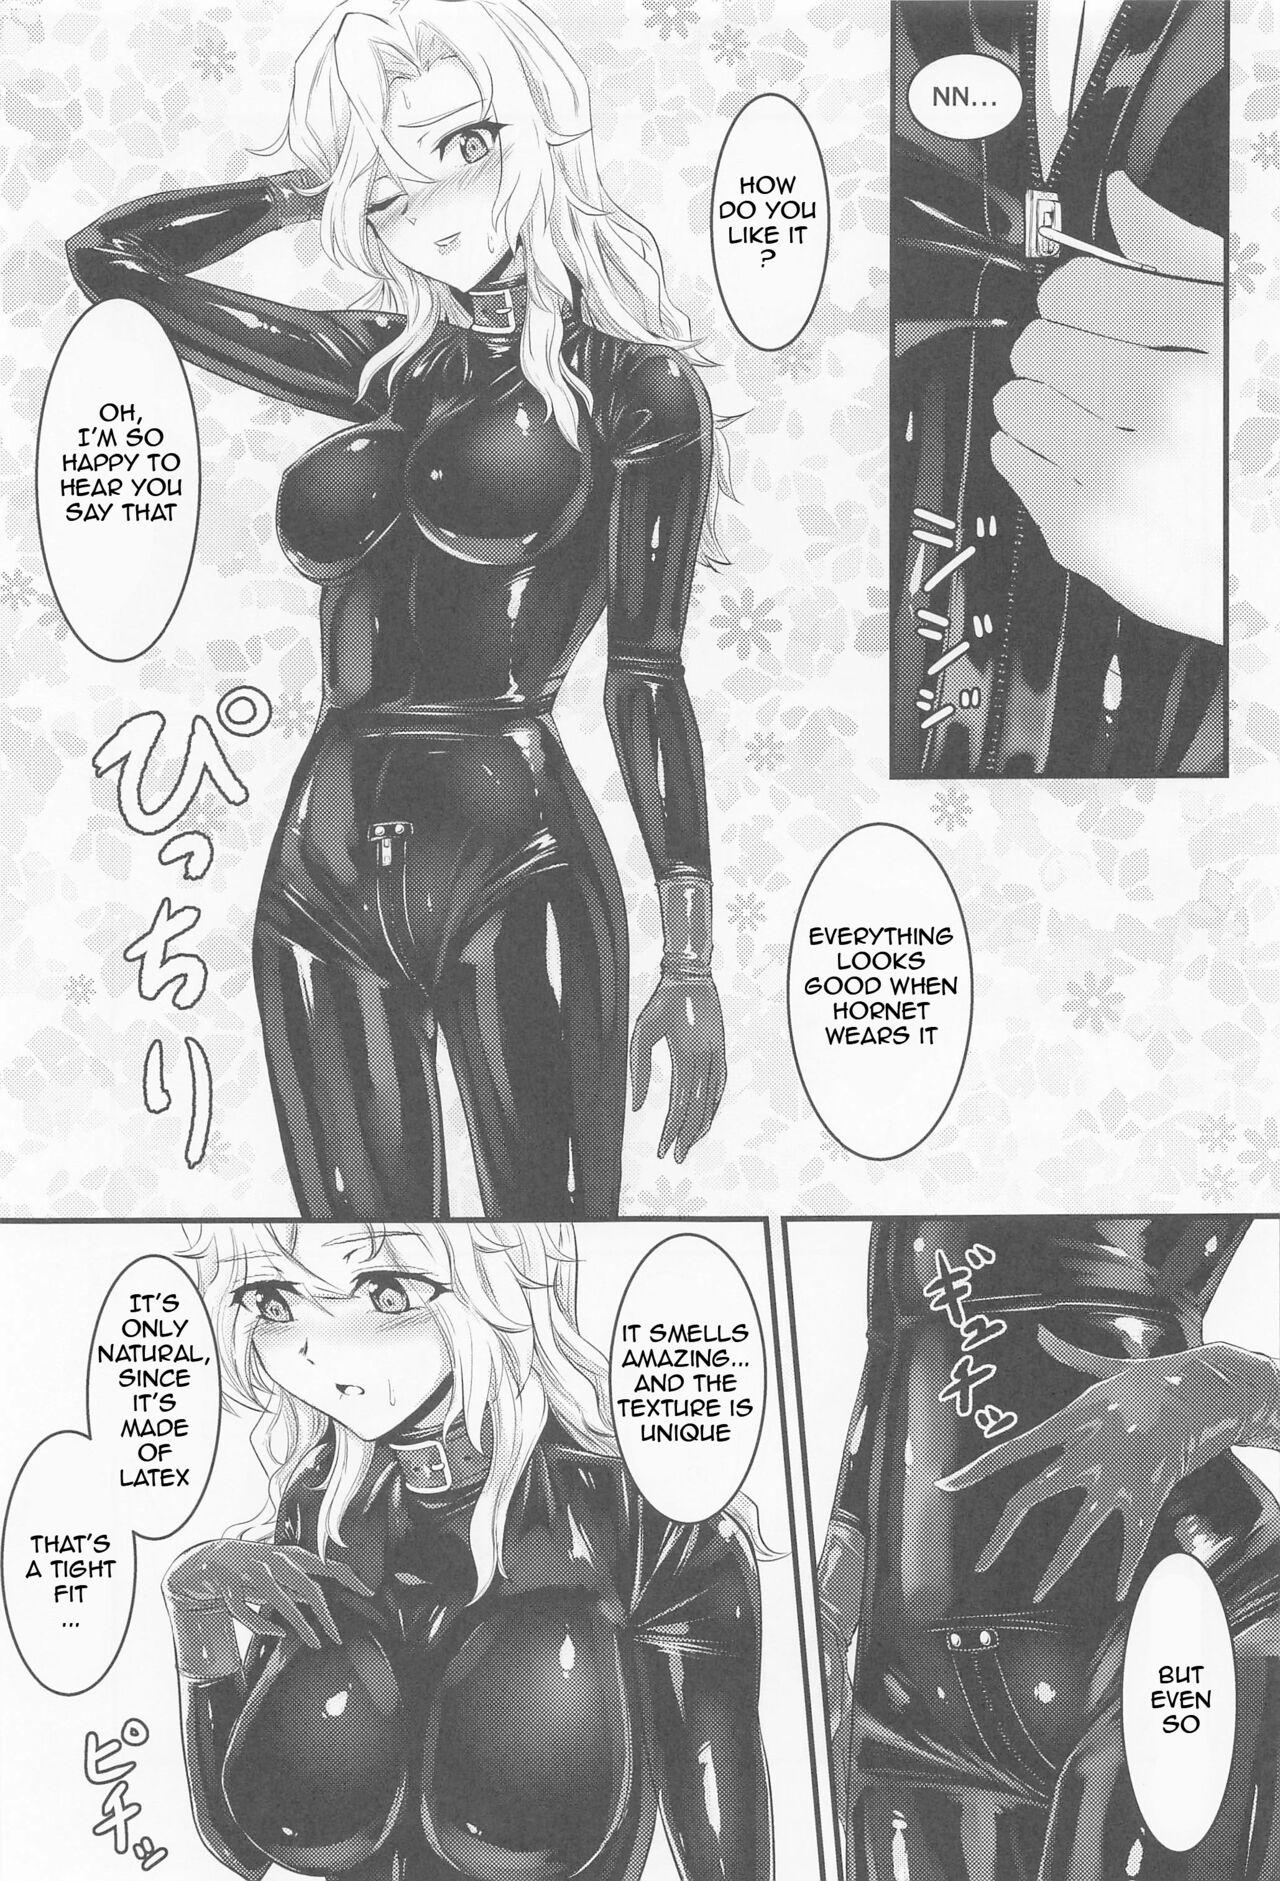 European Porn Covered by Honey... - Kantai collection Backshots - Page 8